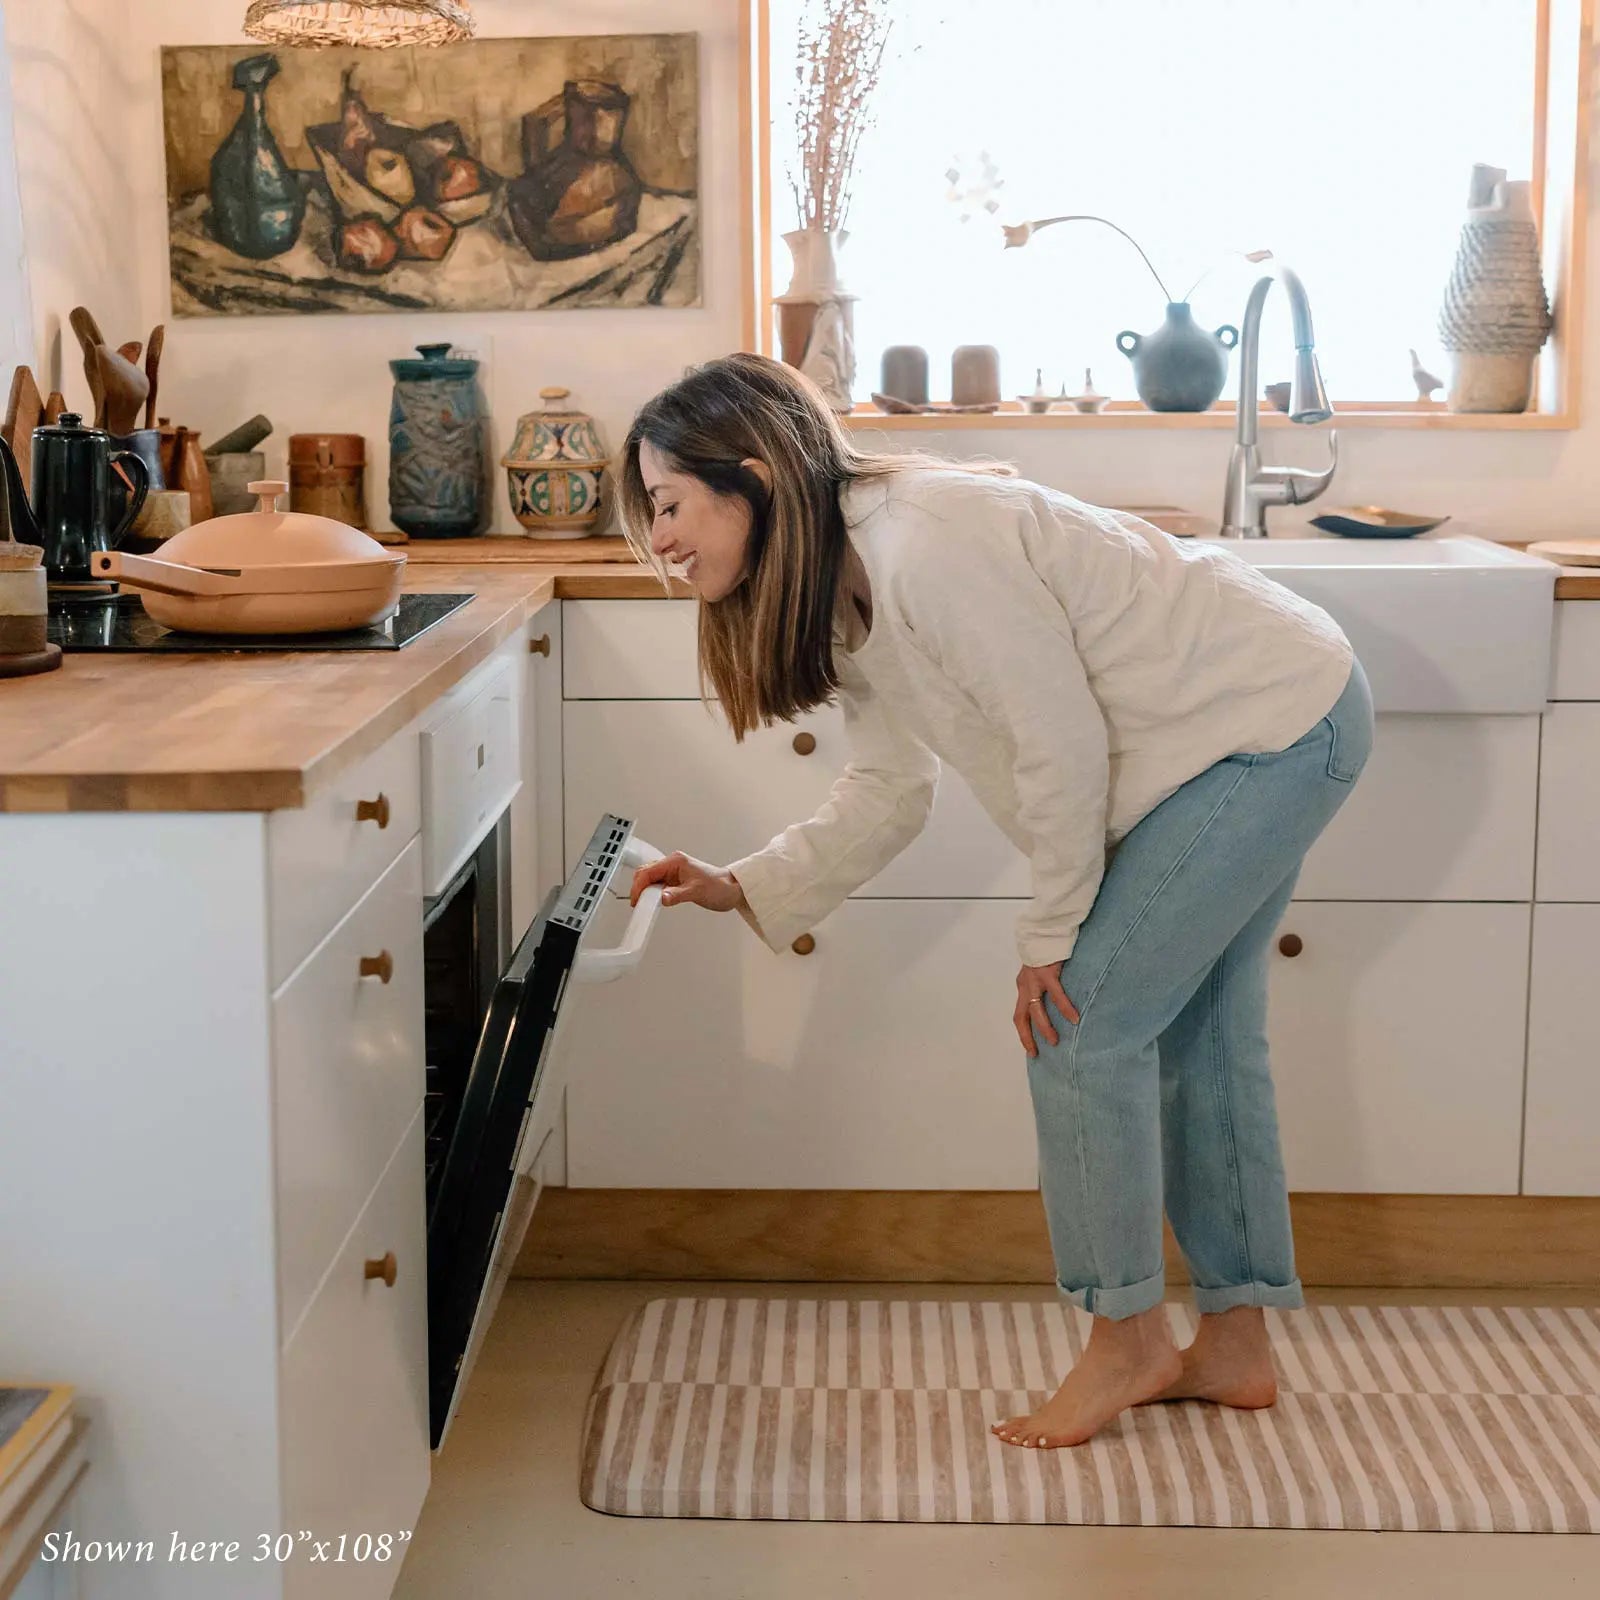 Reese chai beige and white inverted stripe standing mat shown in kitchen in size 30x108 with woman standing on mat opening the oven